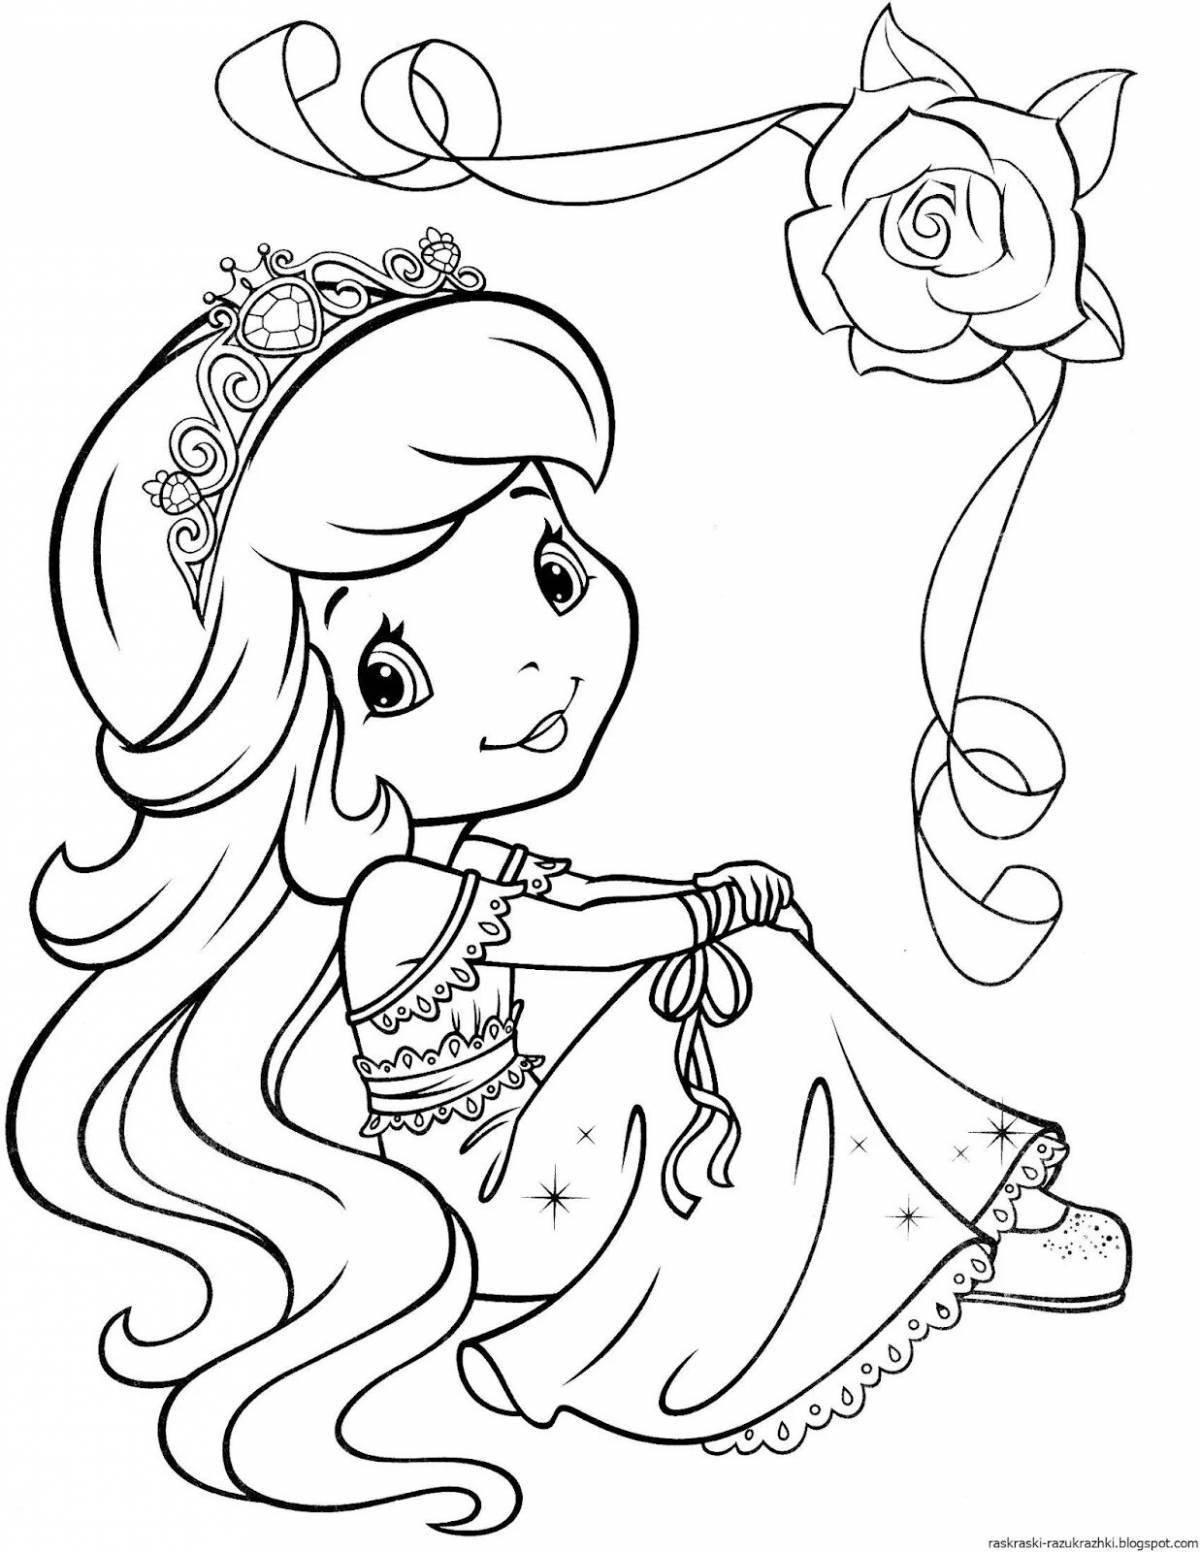 Amazing coloring book for 6 year old girls